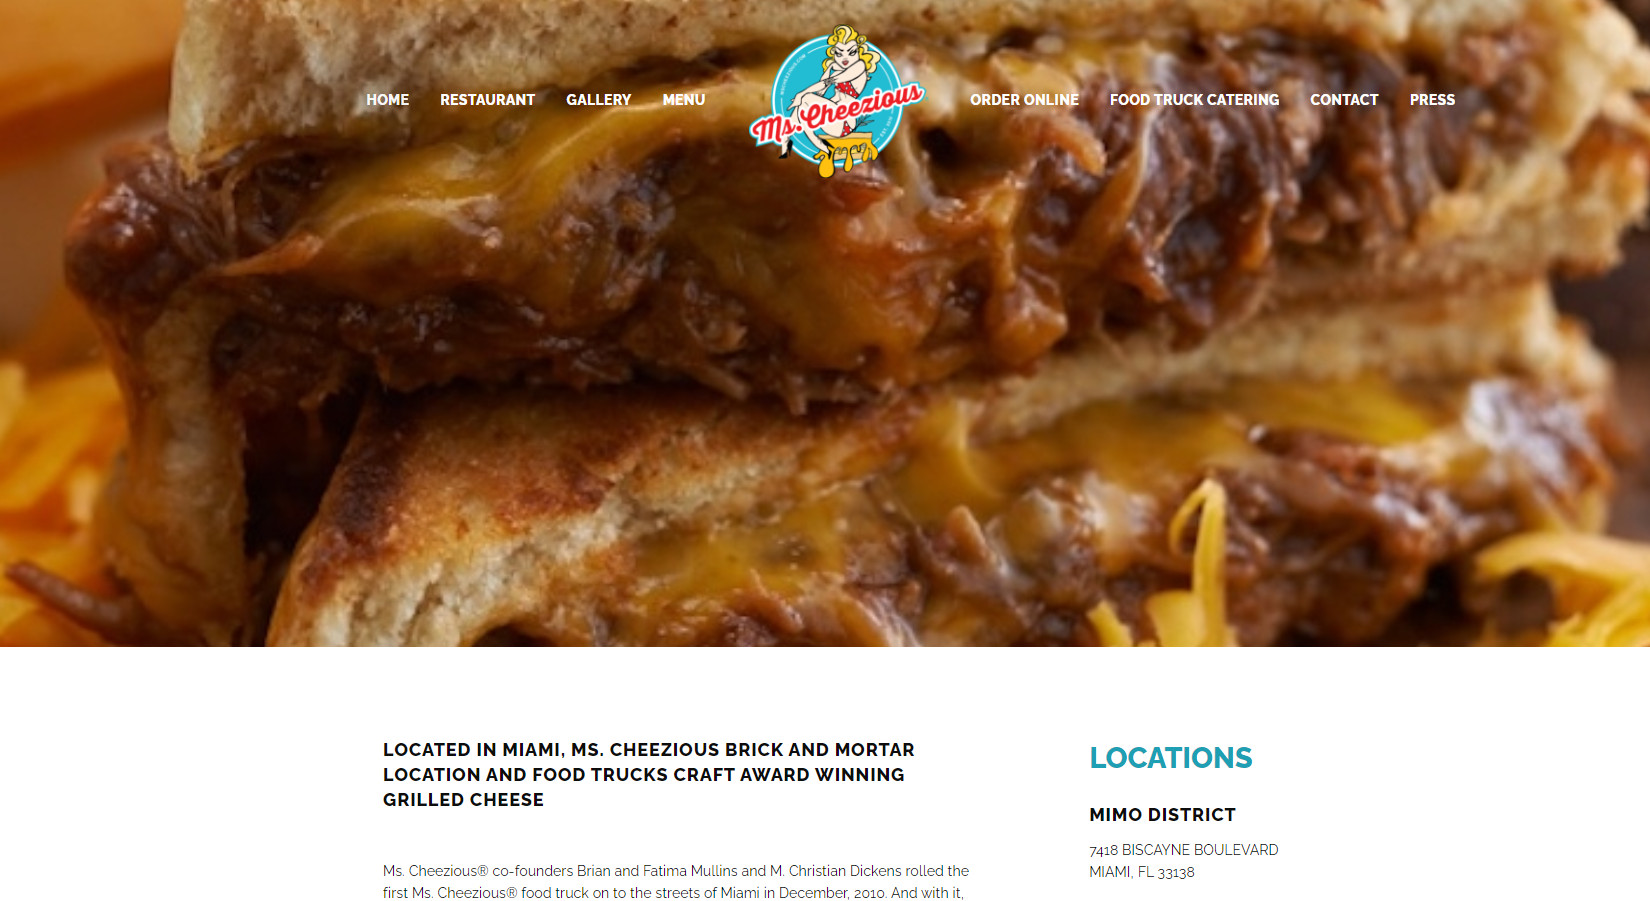 5 food truck websites example Ms. Cheezious